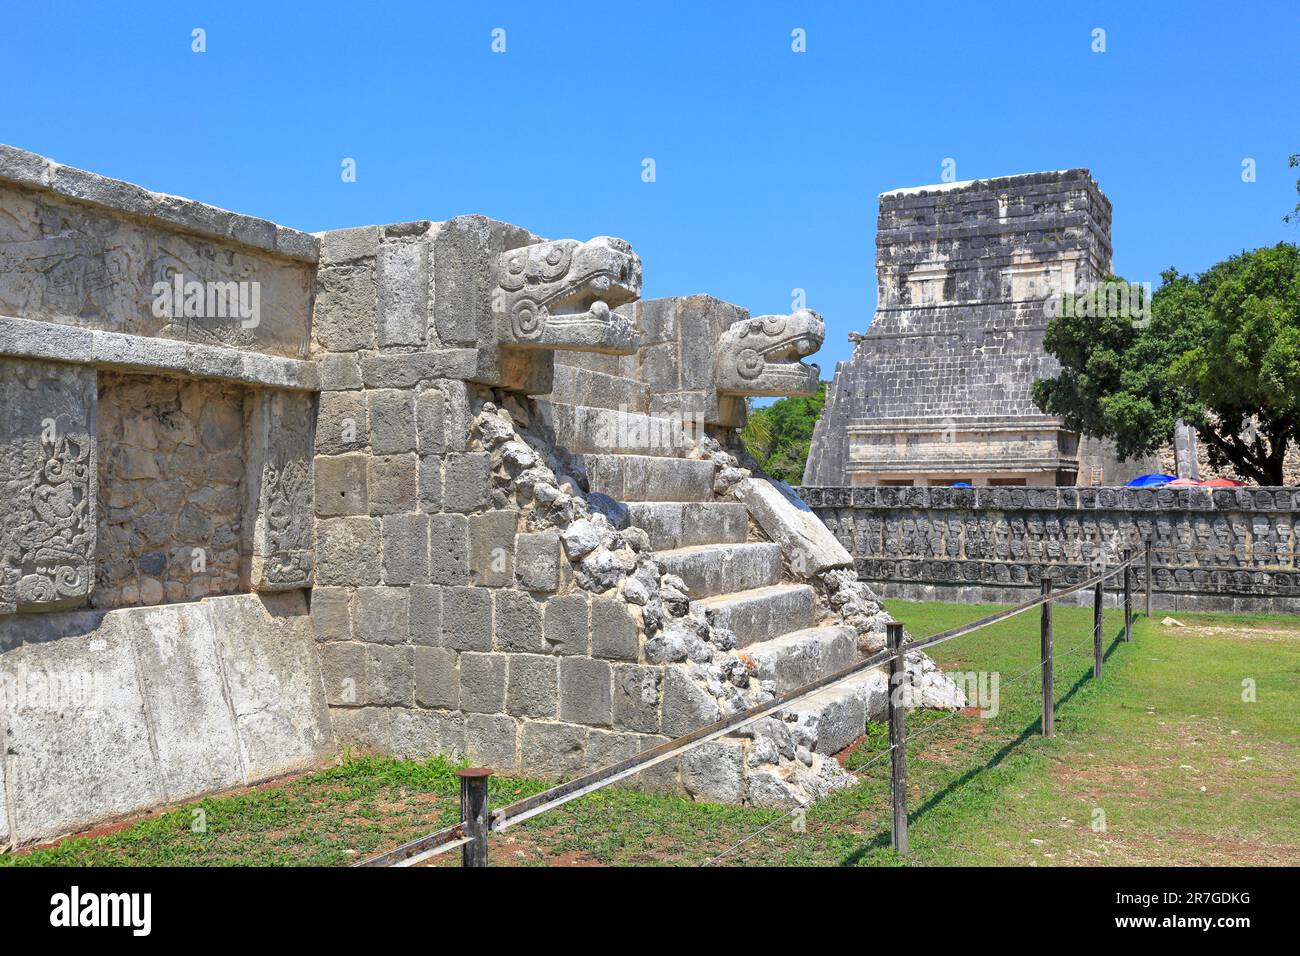 The Platform of the Eagles and Jaguars and The Temple of the Jaguar at Chichen Itza, Yucatan, Yucatan Peninsular, Mexico. Stock Photo